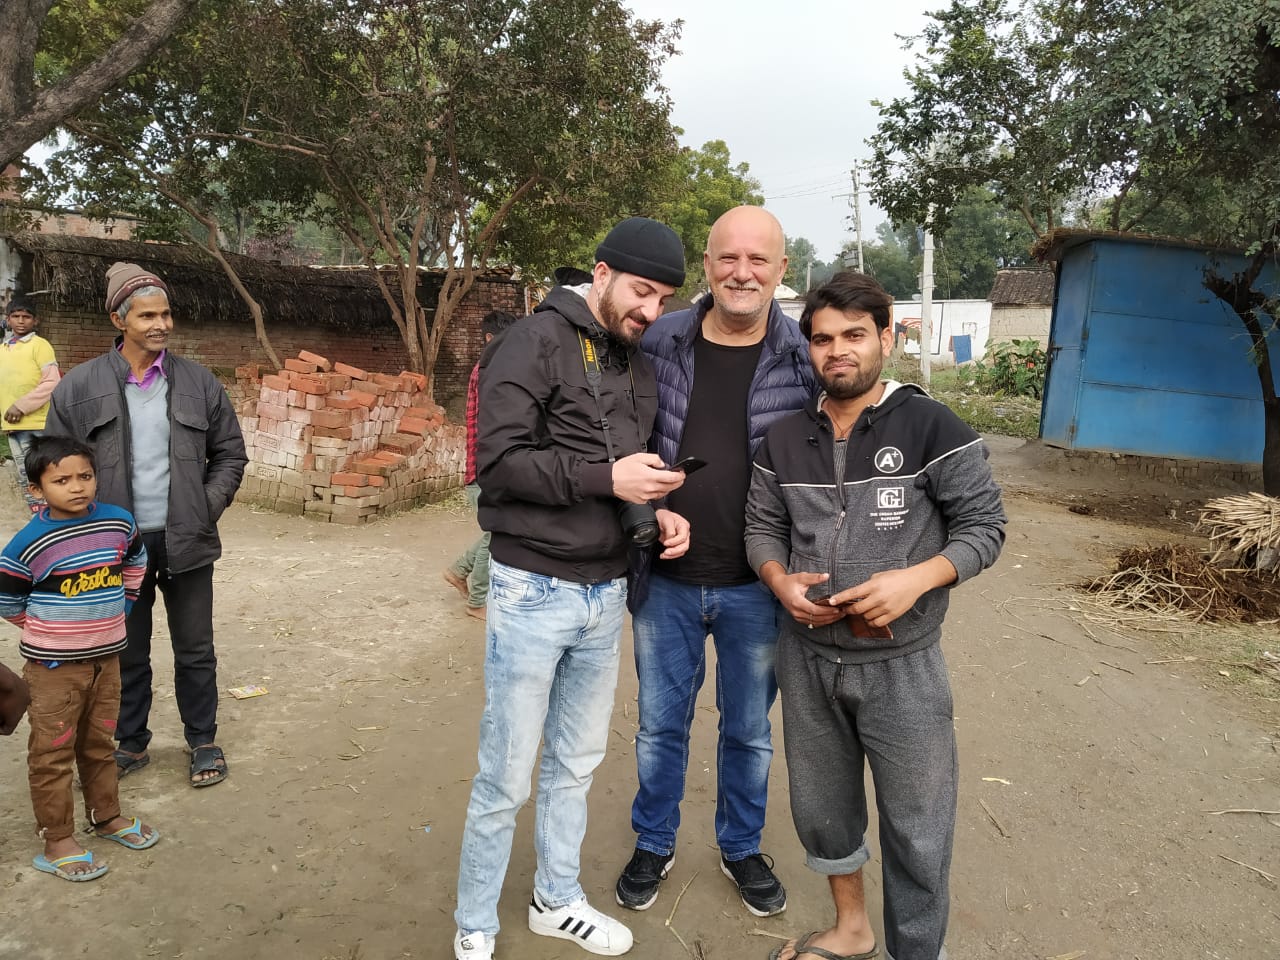 Mr. Mark From Italy Visited North India With Us